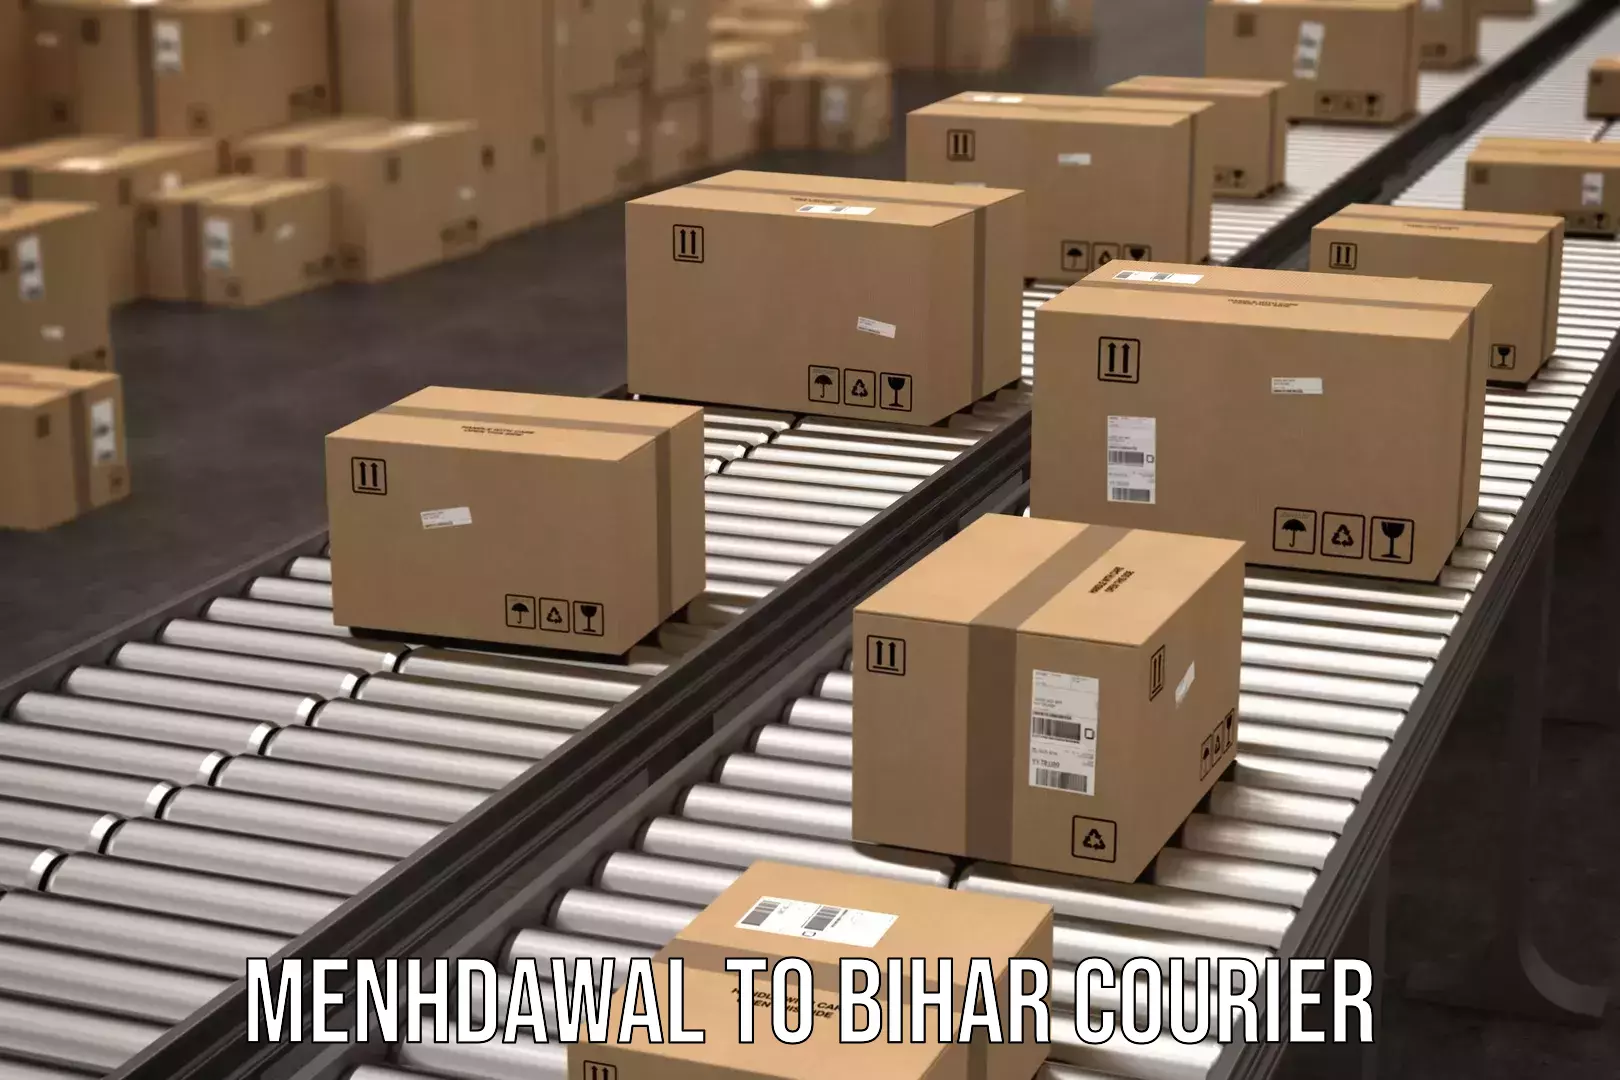 24-hour courier service Menhdawal to Bankipore